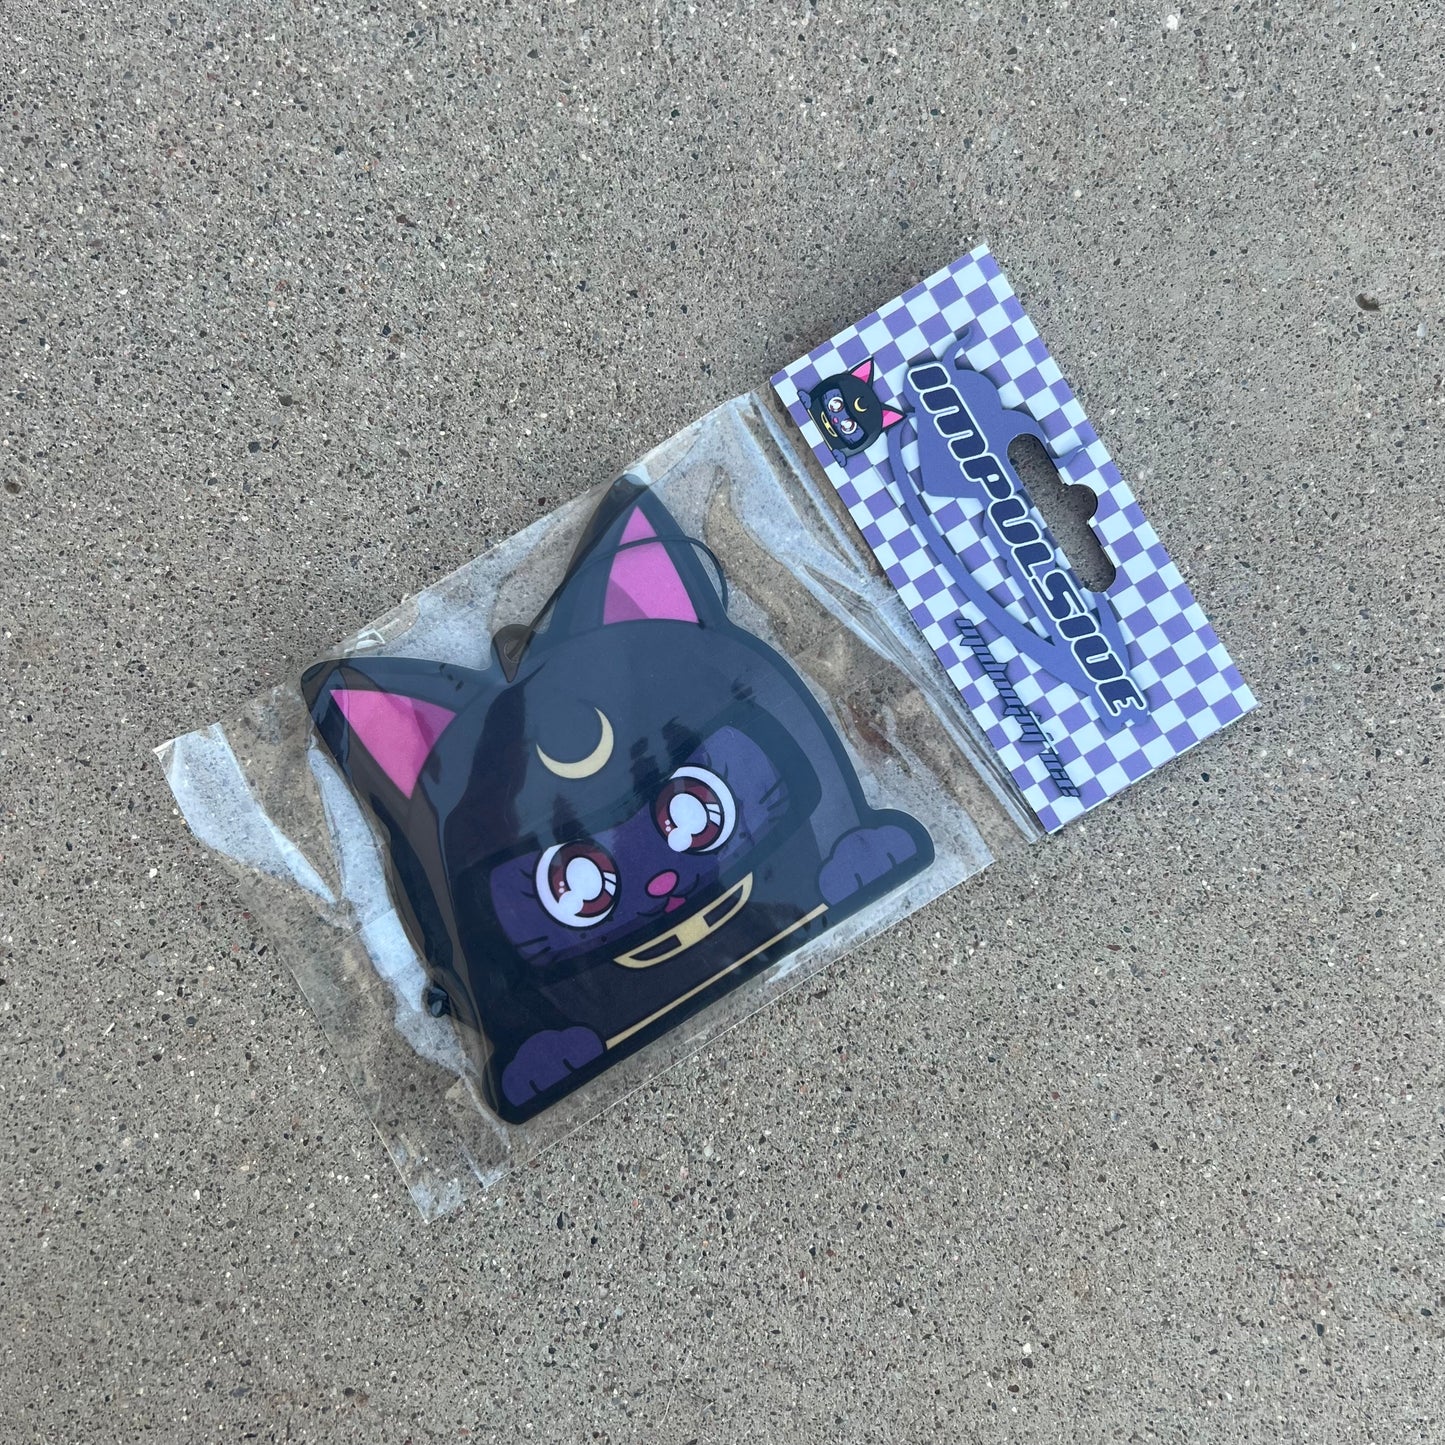 purple luna cat wearing grey helmet with moon crescent in center air freshener hanging from black string. Purple Checkered background with purple impulsive llc y2k logo midnight ice label cardboard head card packaging.